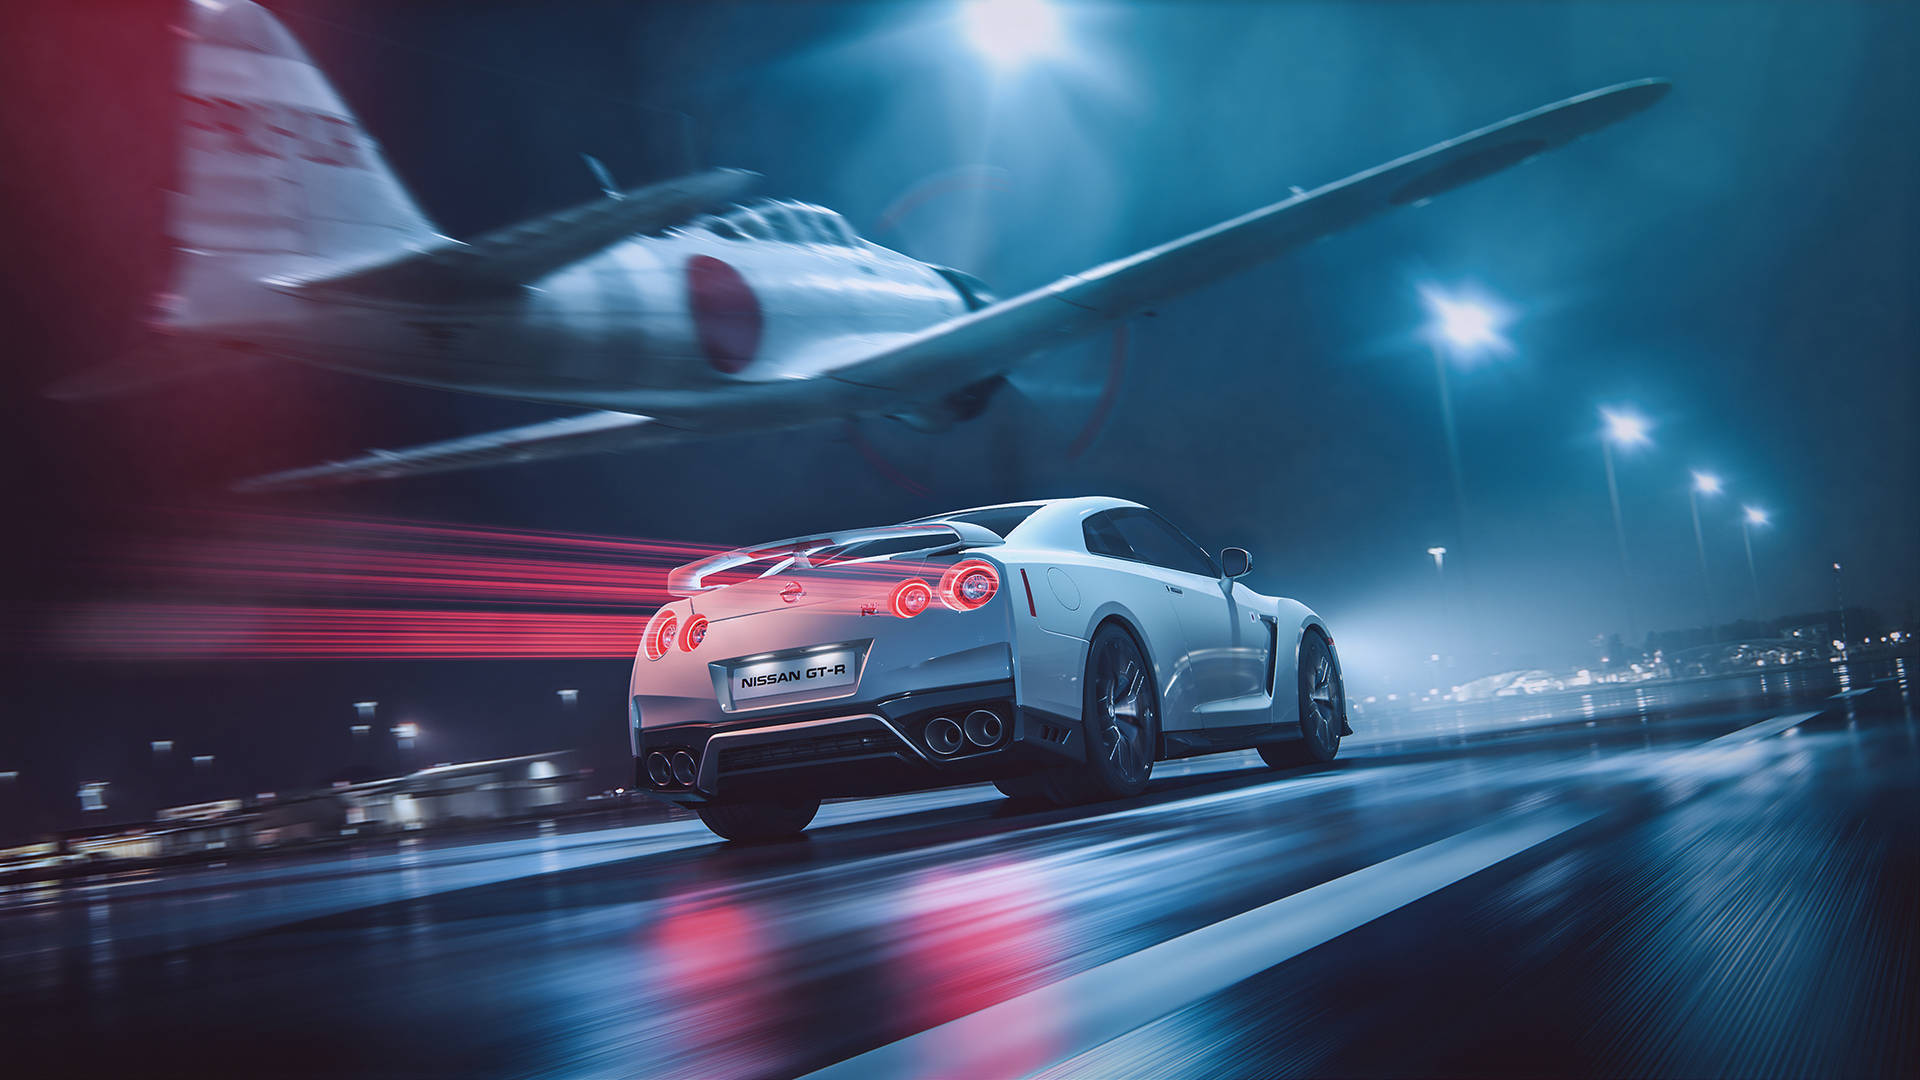 Airplane And White Nissan Gt R 4k Wallpaper